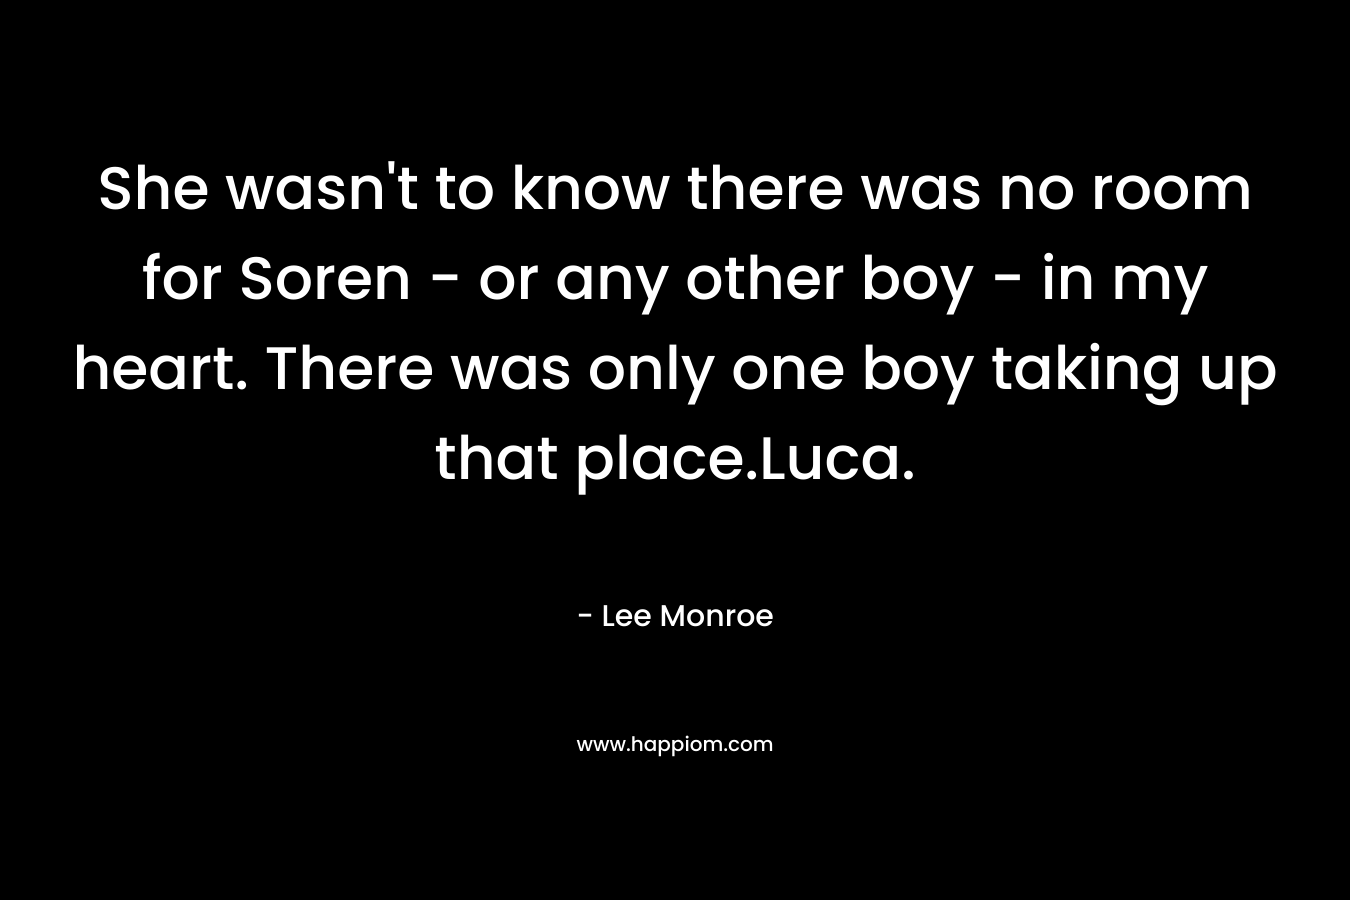 She wasn't to know there was no room for Soren - or any other boy - in my heart. There was only one boy taking up that place.Luca.